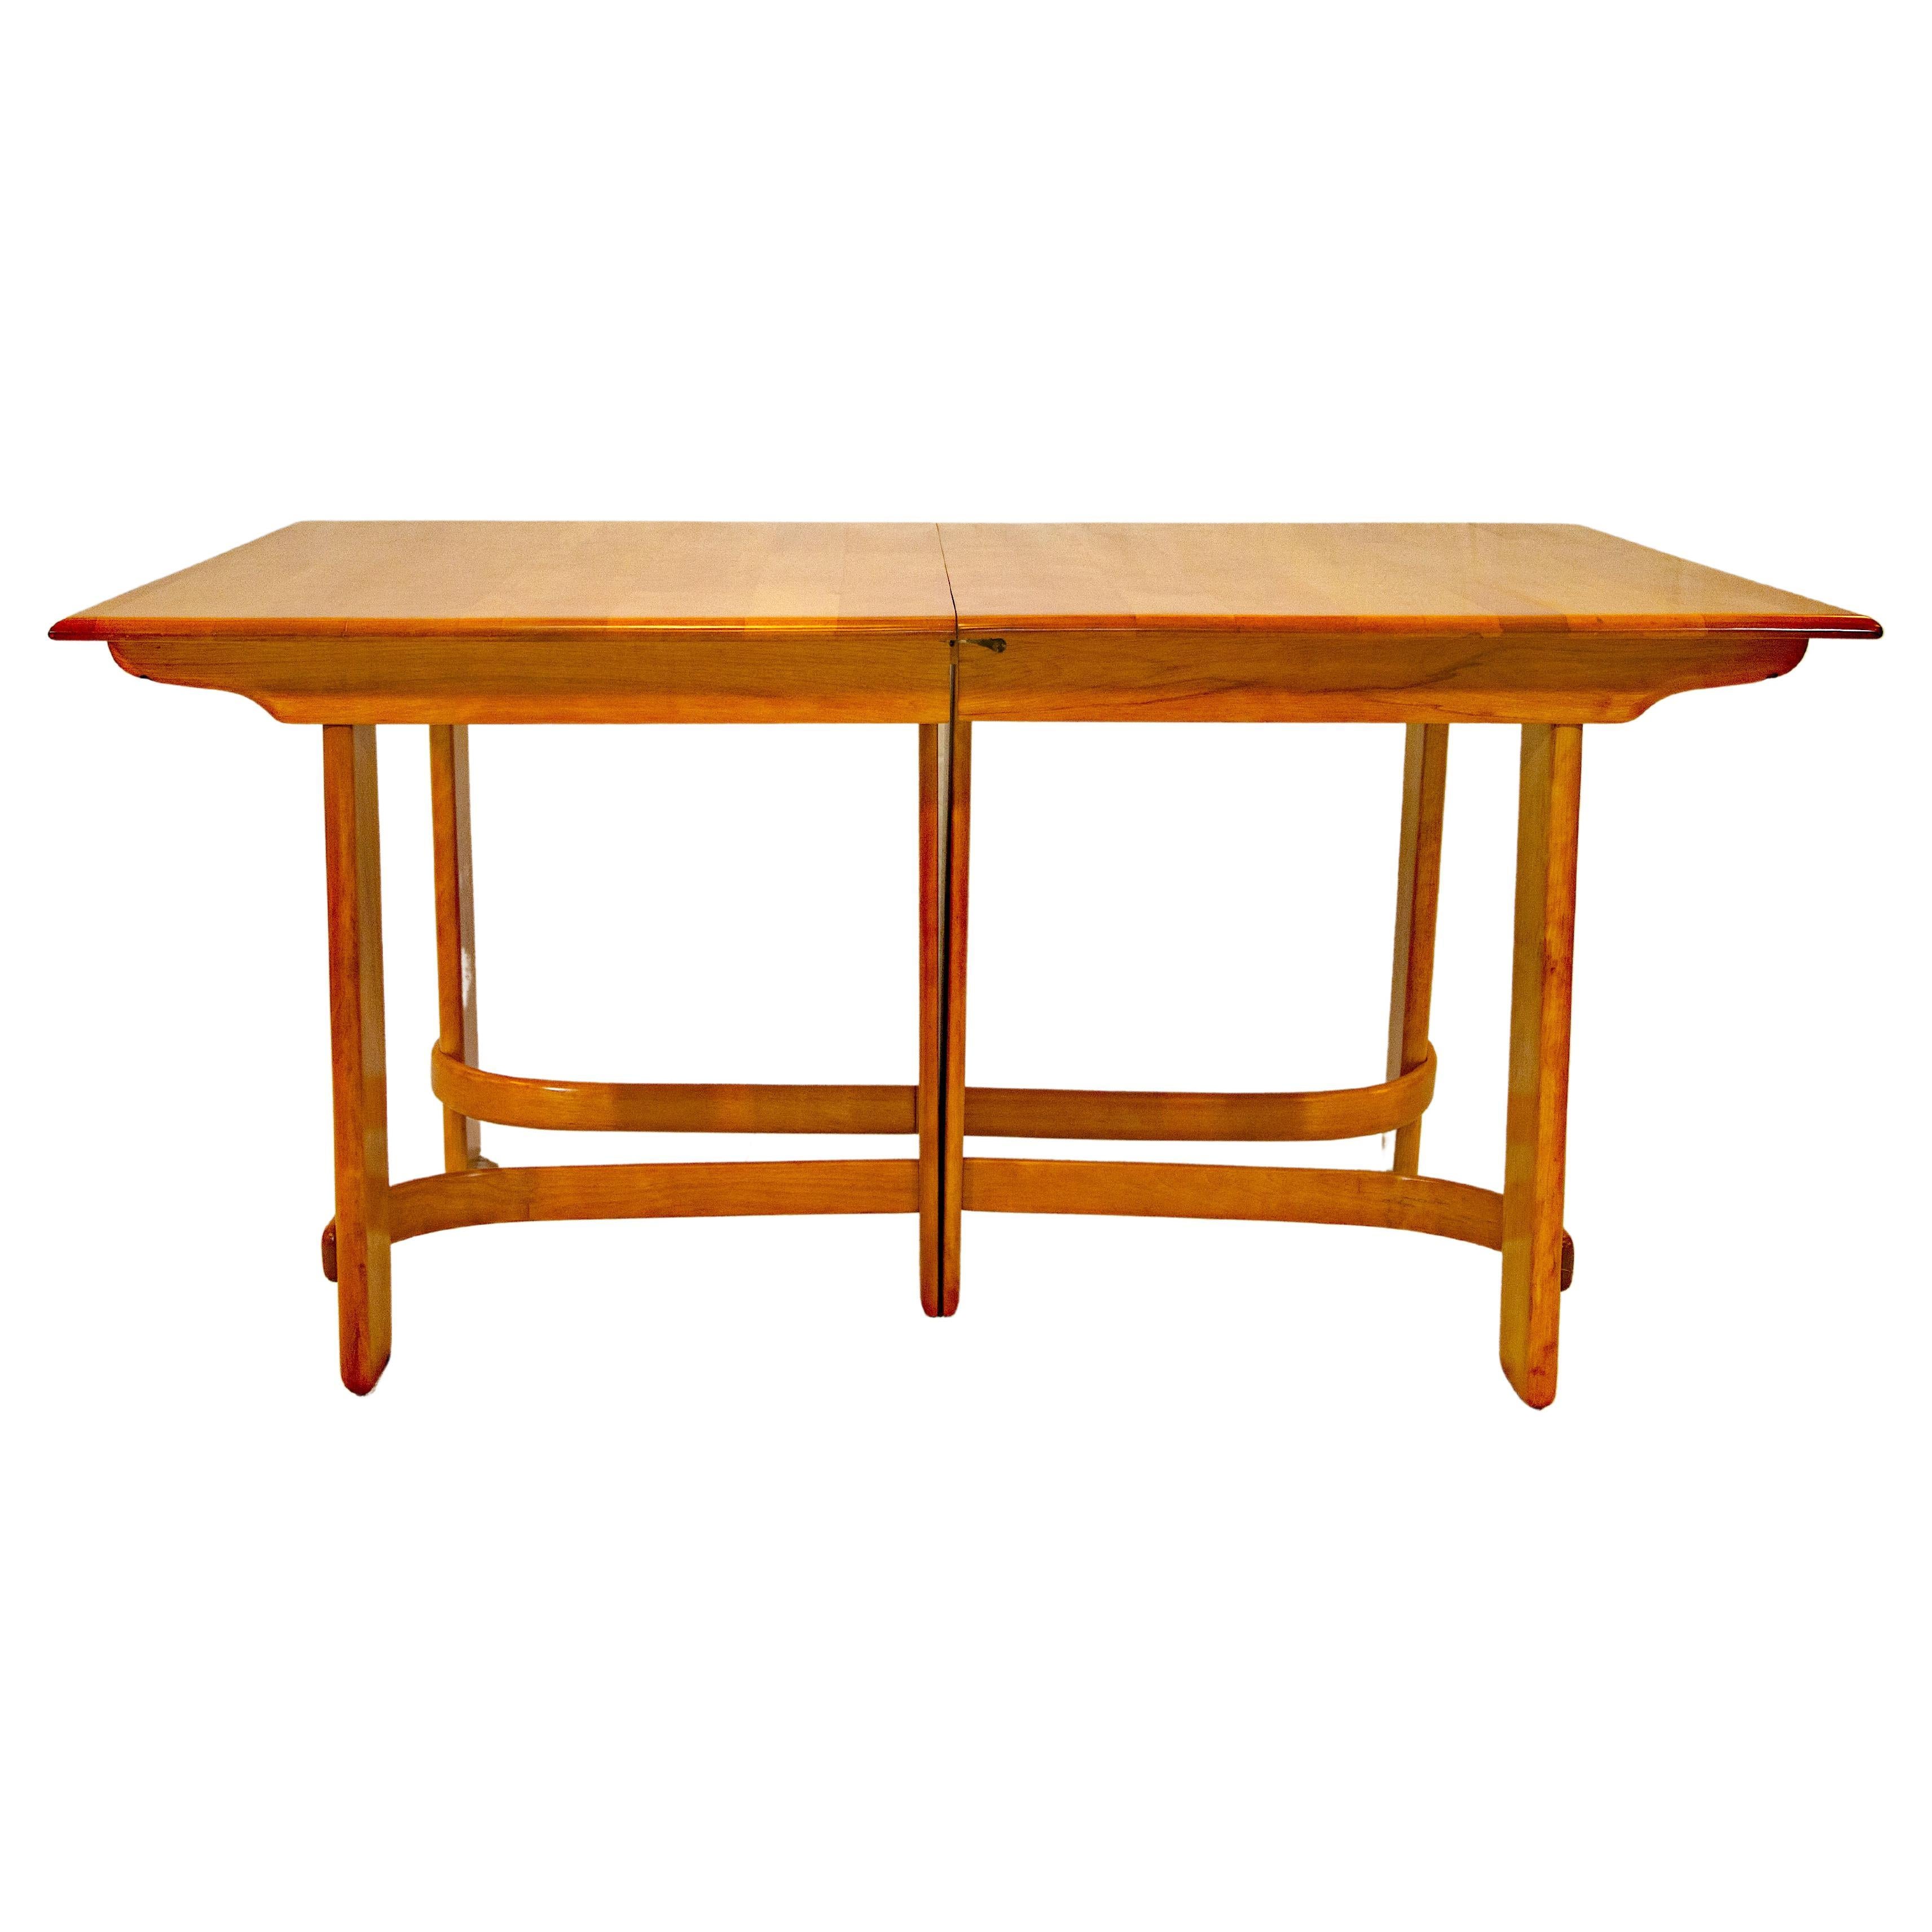 Heywood Wakefield Dining Table by Gilbert Rohde, Two Leaves C2932G